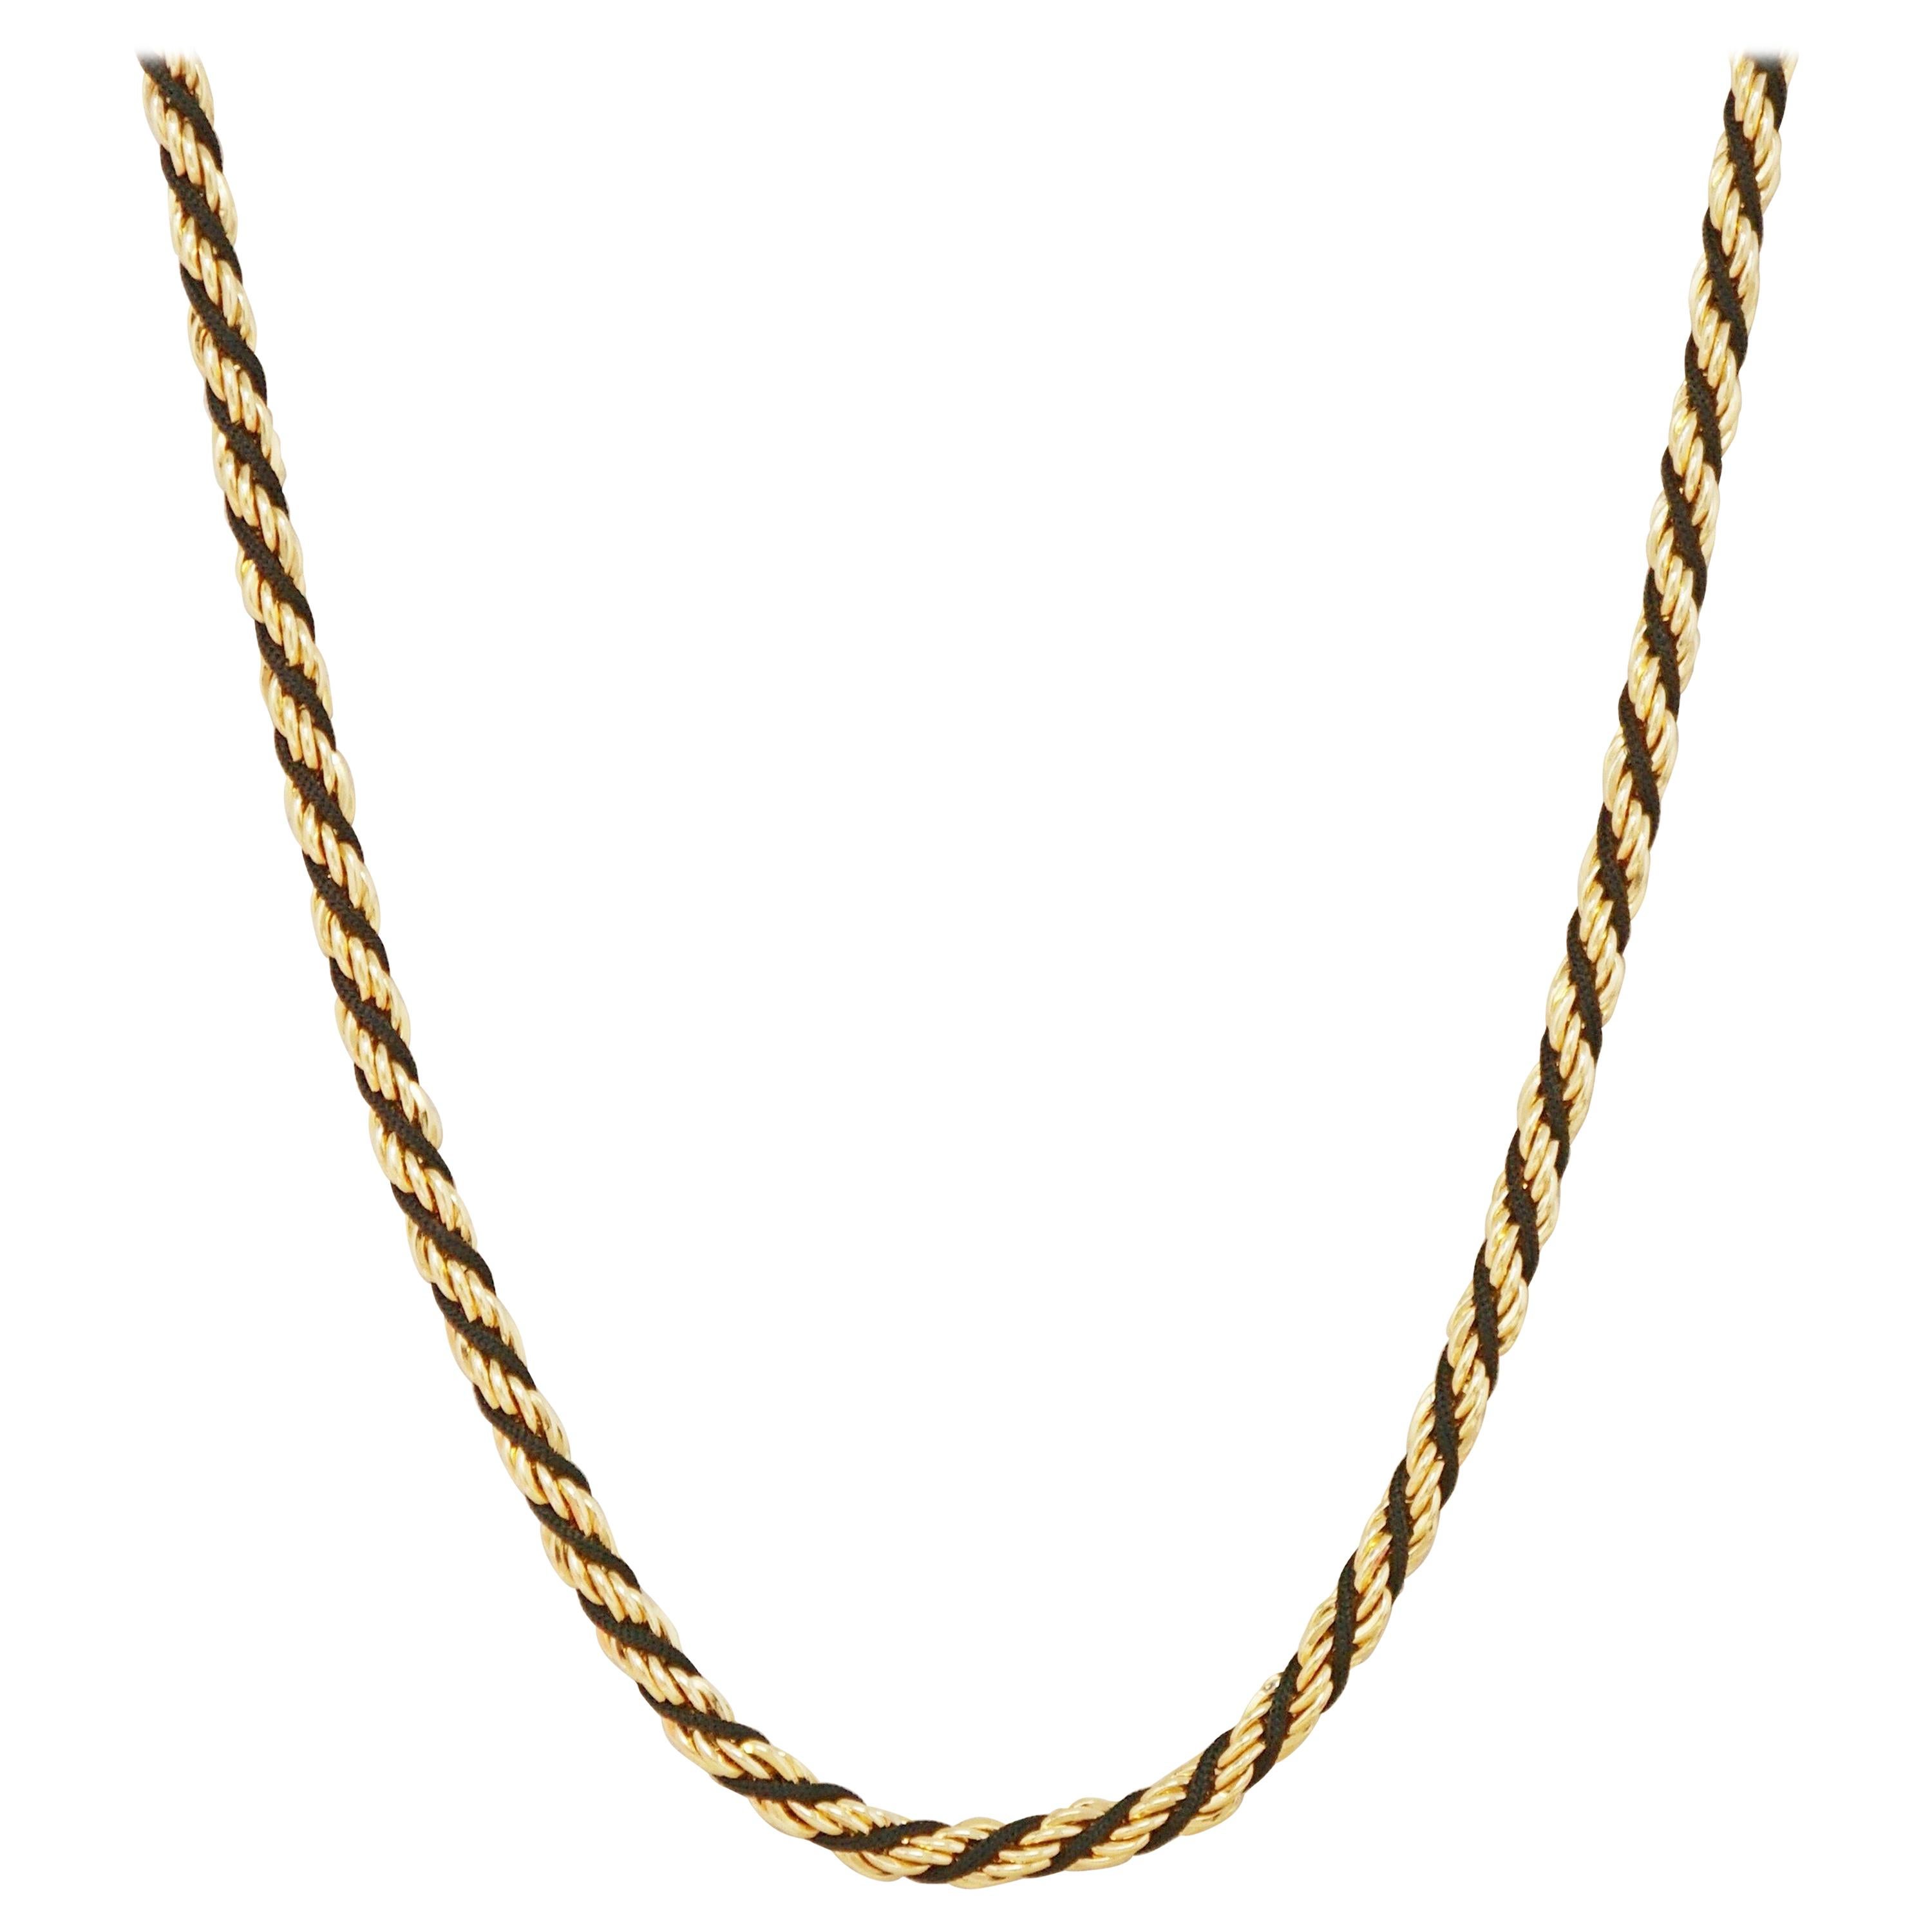 Vintage 24" Gilt & Black Cord Twisted Chain Necklace by Trifari, 1970s For Sale